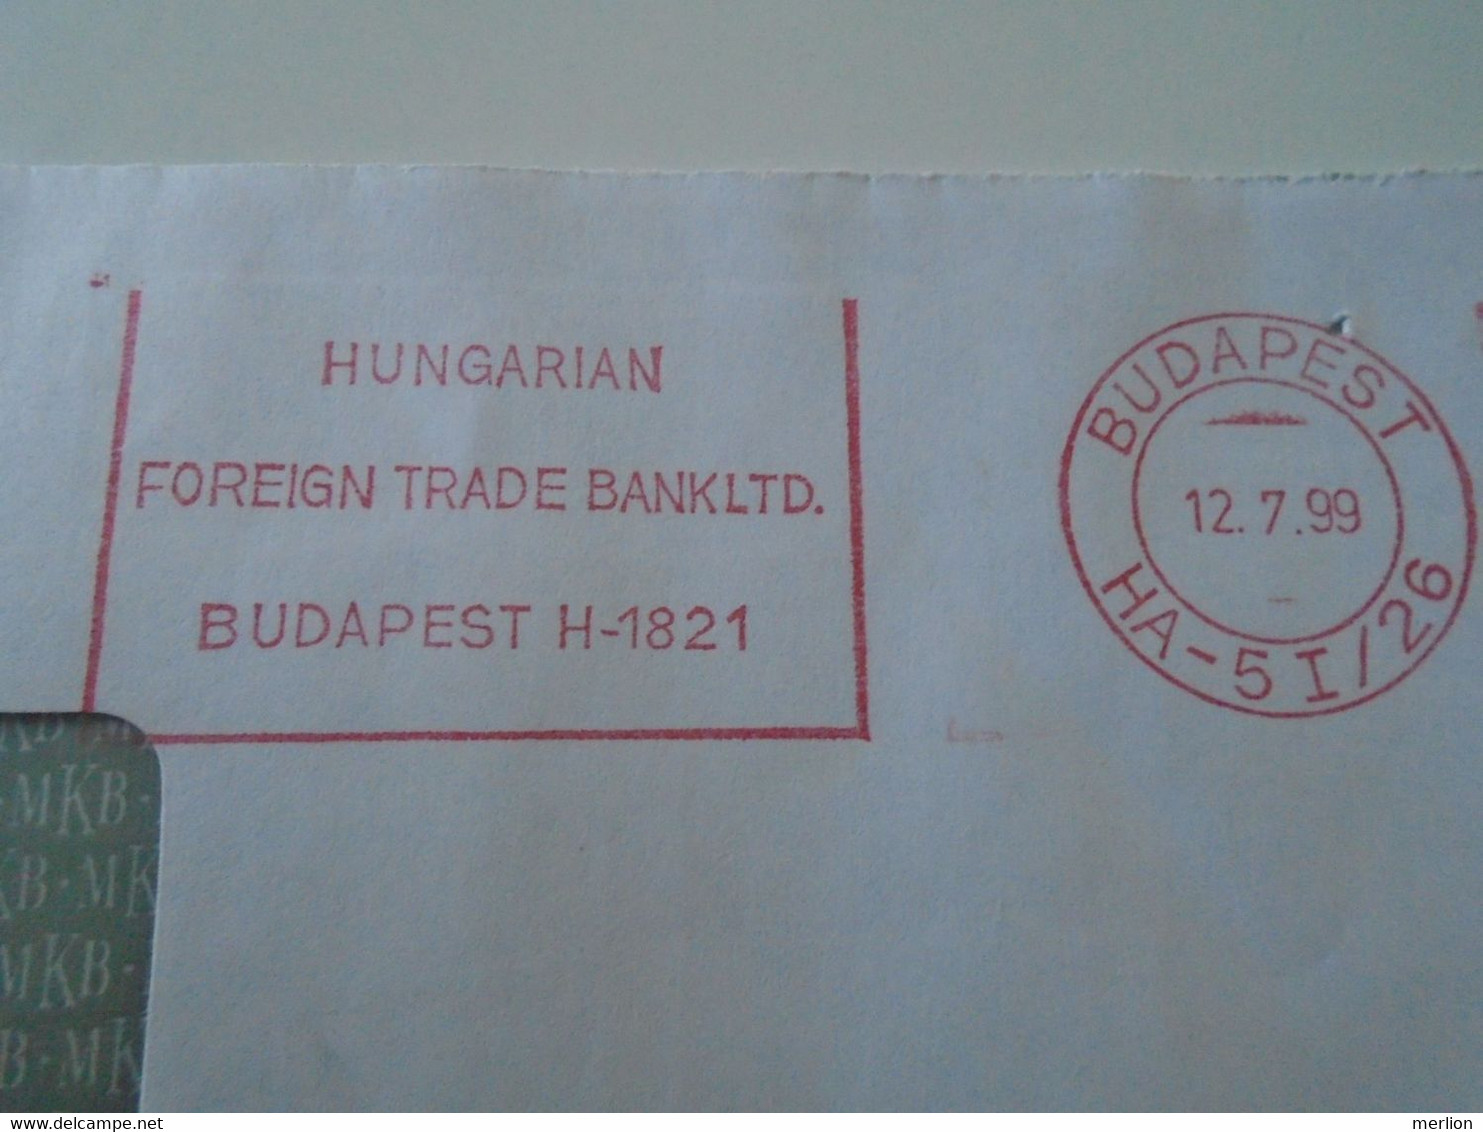 AD00012.119  Hungary Cover  -EMA Red Meter Freistempel-   1999   Budapest  MKB - Hungarian Foreign Trade Bank - Machine Labels [ATM]